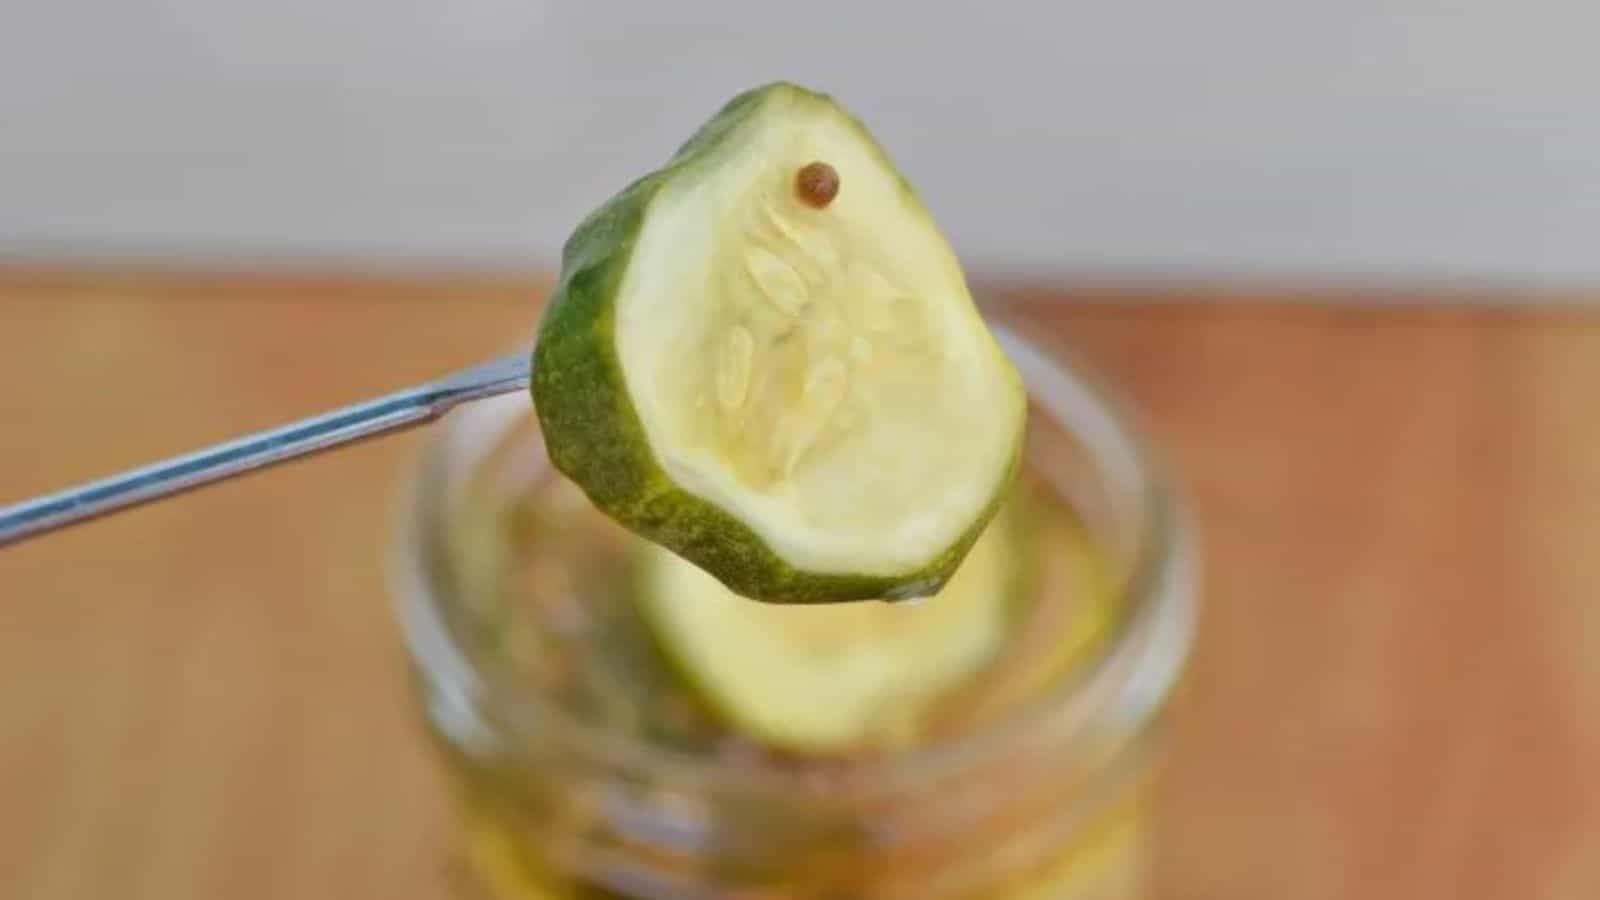 Image shows a skewer holding a bread and butter pickle with the full mason jar behind it.